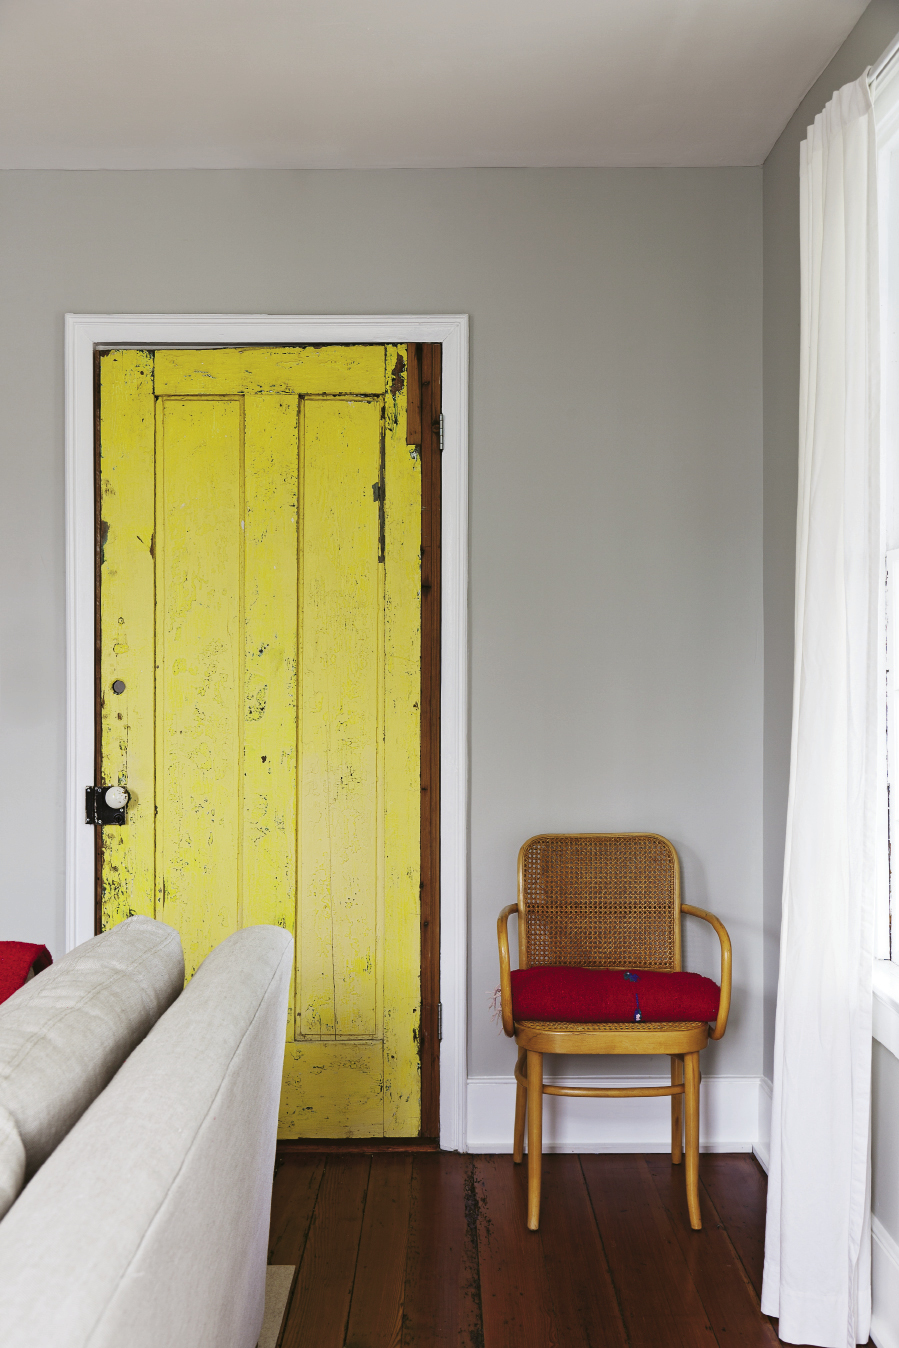 When the couple bought the building, this heart-pine door, originally the home’s back entry, was painted bright yellow. It’s been cleaned up and brought inside, but vestiges of the sunny paint color remain.